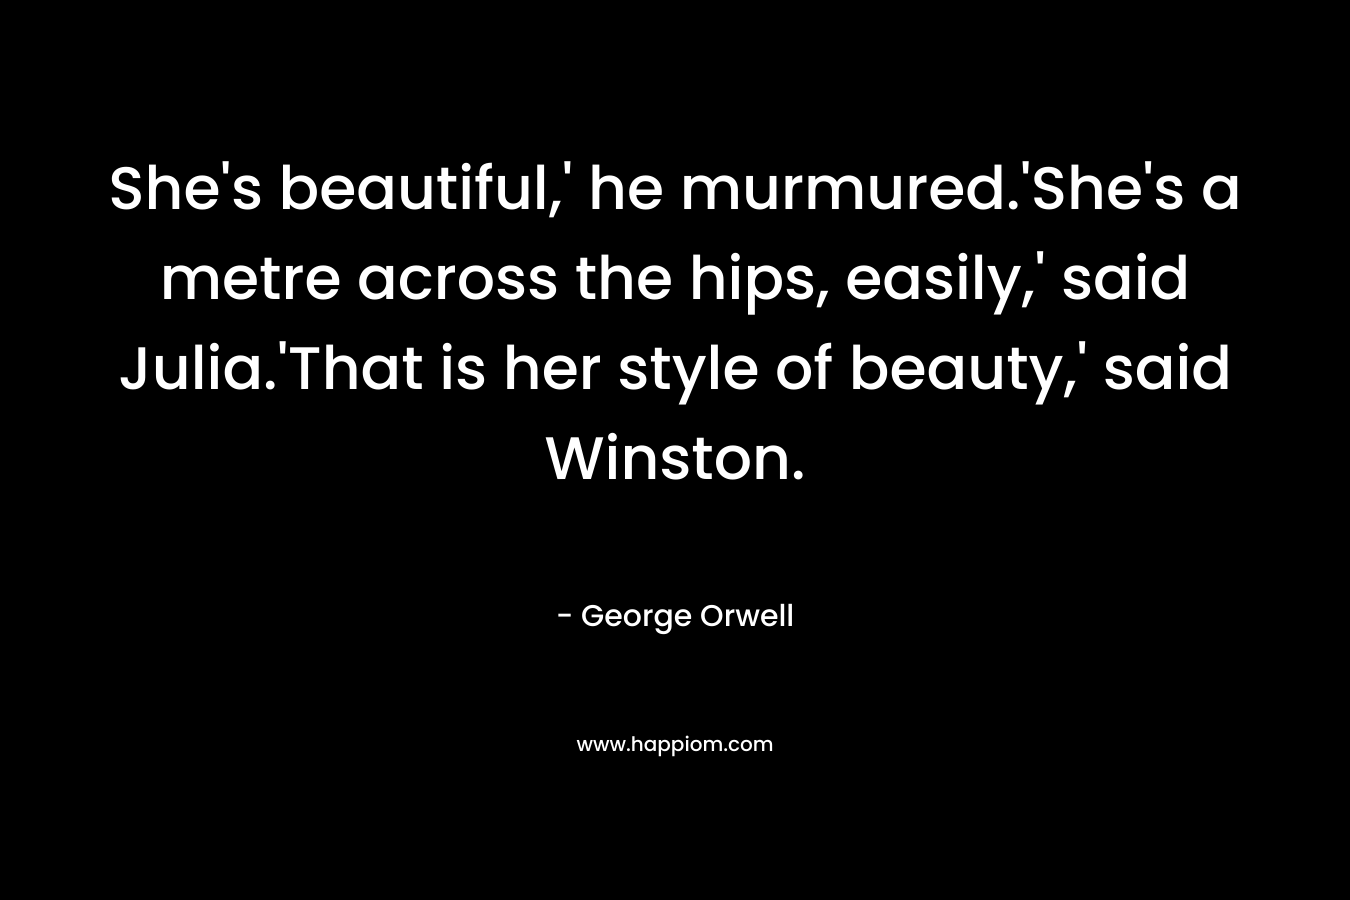 She's beautiful,' he murmured.'She's a metre across the hips, easily,' said Julia.'That is her style of beauty,' said Winston.